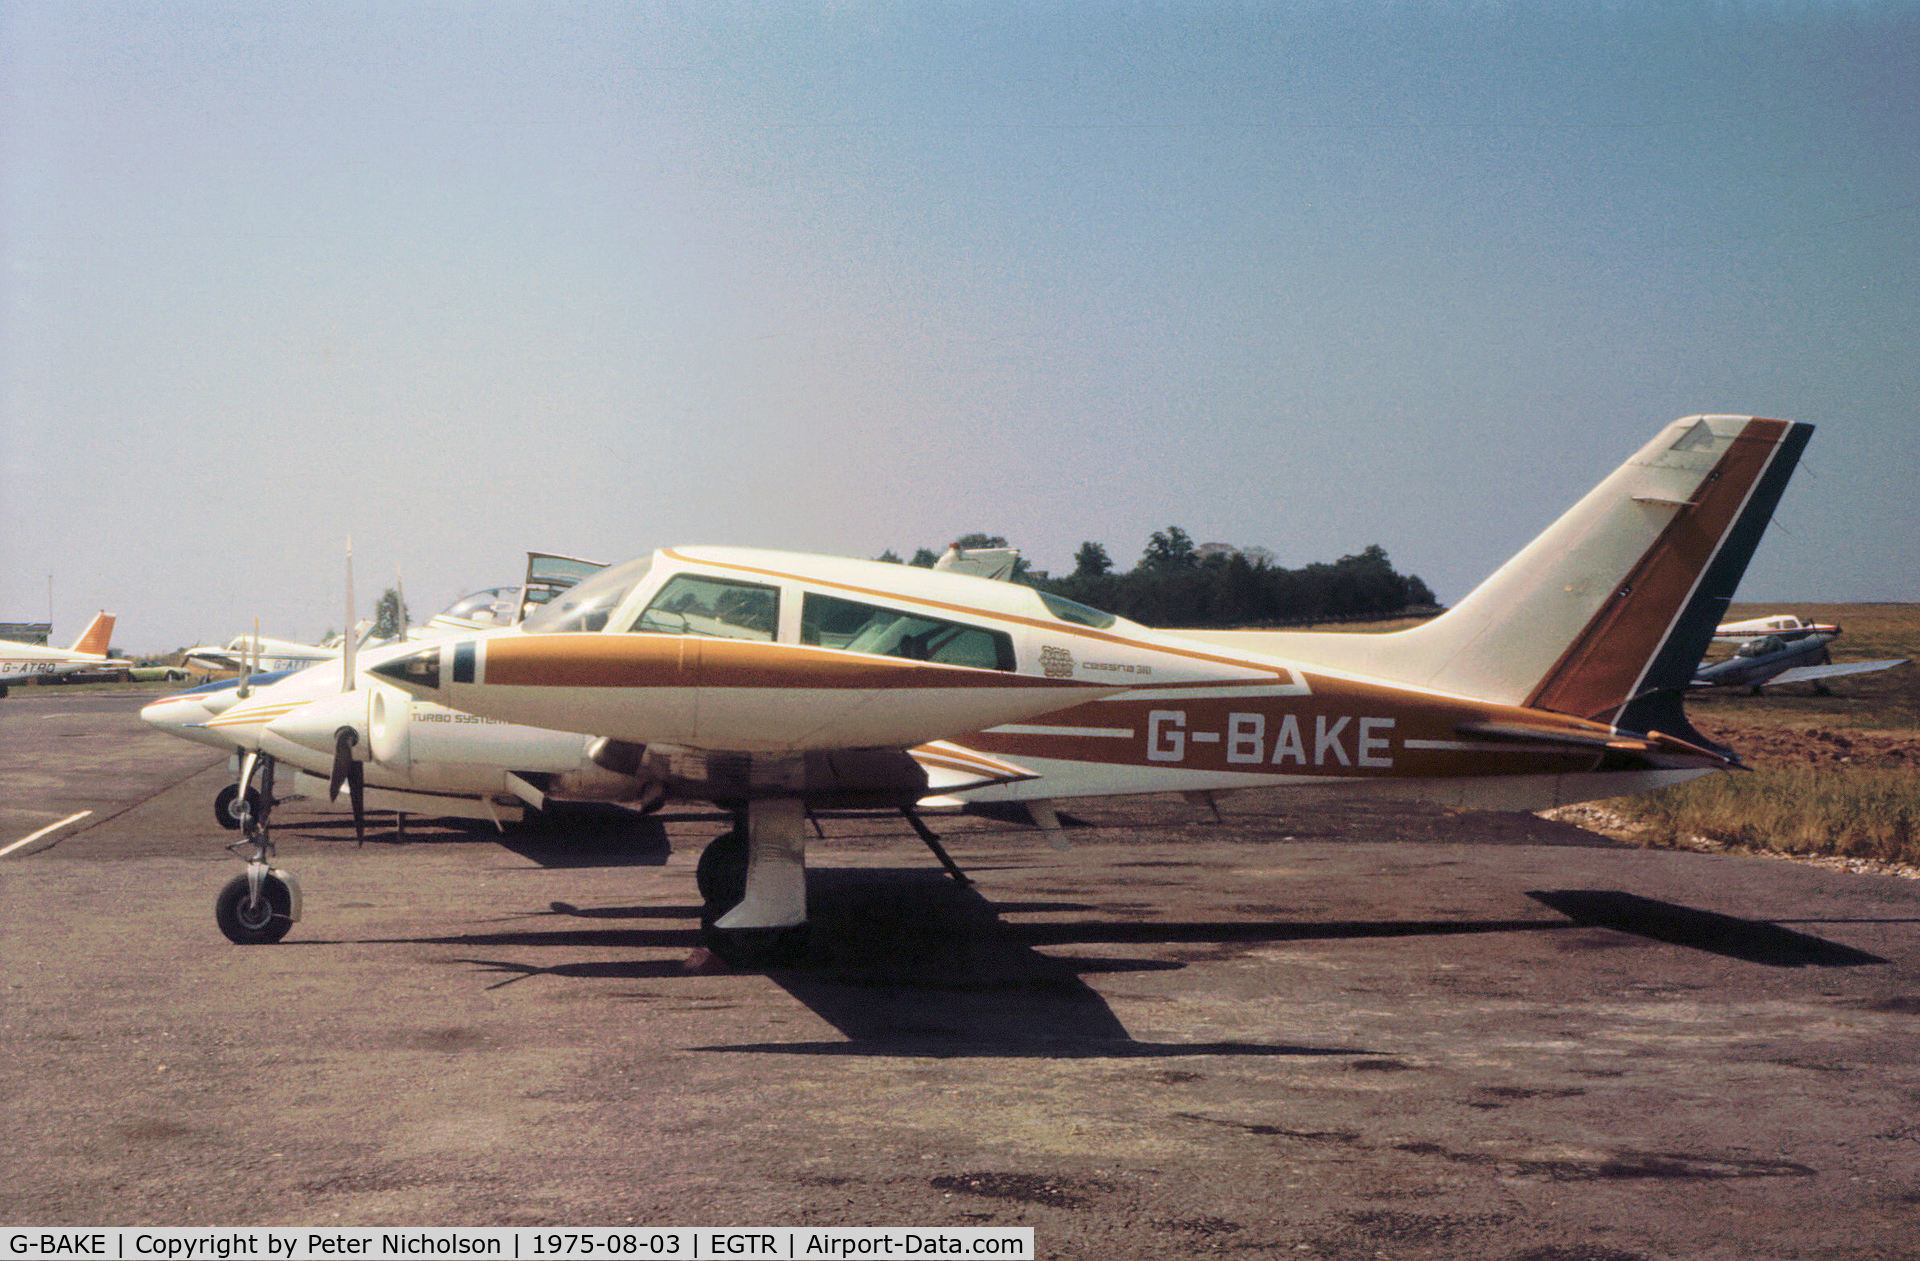 G-BAKE, 1972 Cessna T310Q C/N 310Q-0641, Cessna T310Q resident at Elstree as seen in the Summer of 1975.